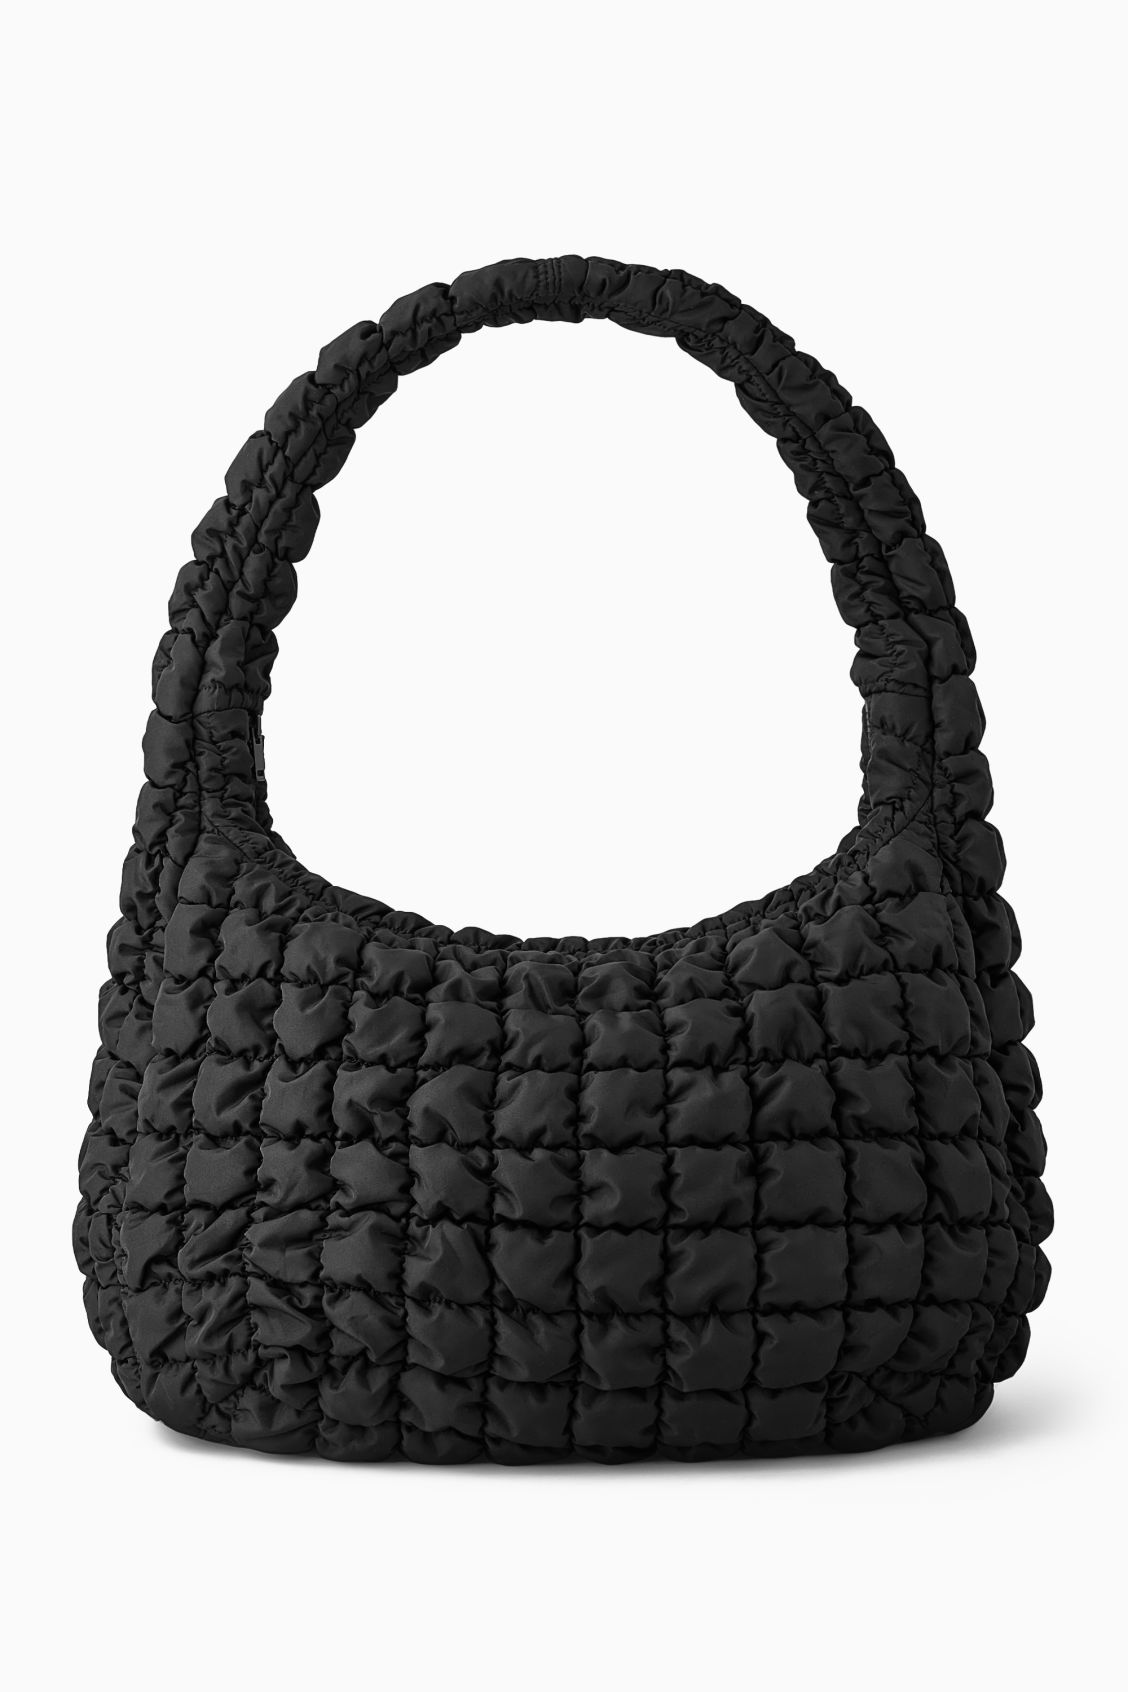 OVERSIZED QUILTED CROSSBODY £85, COS